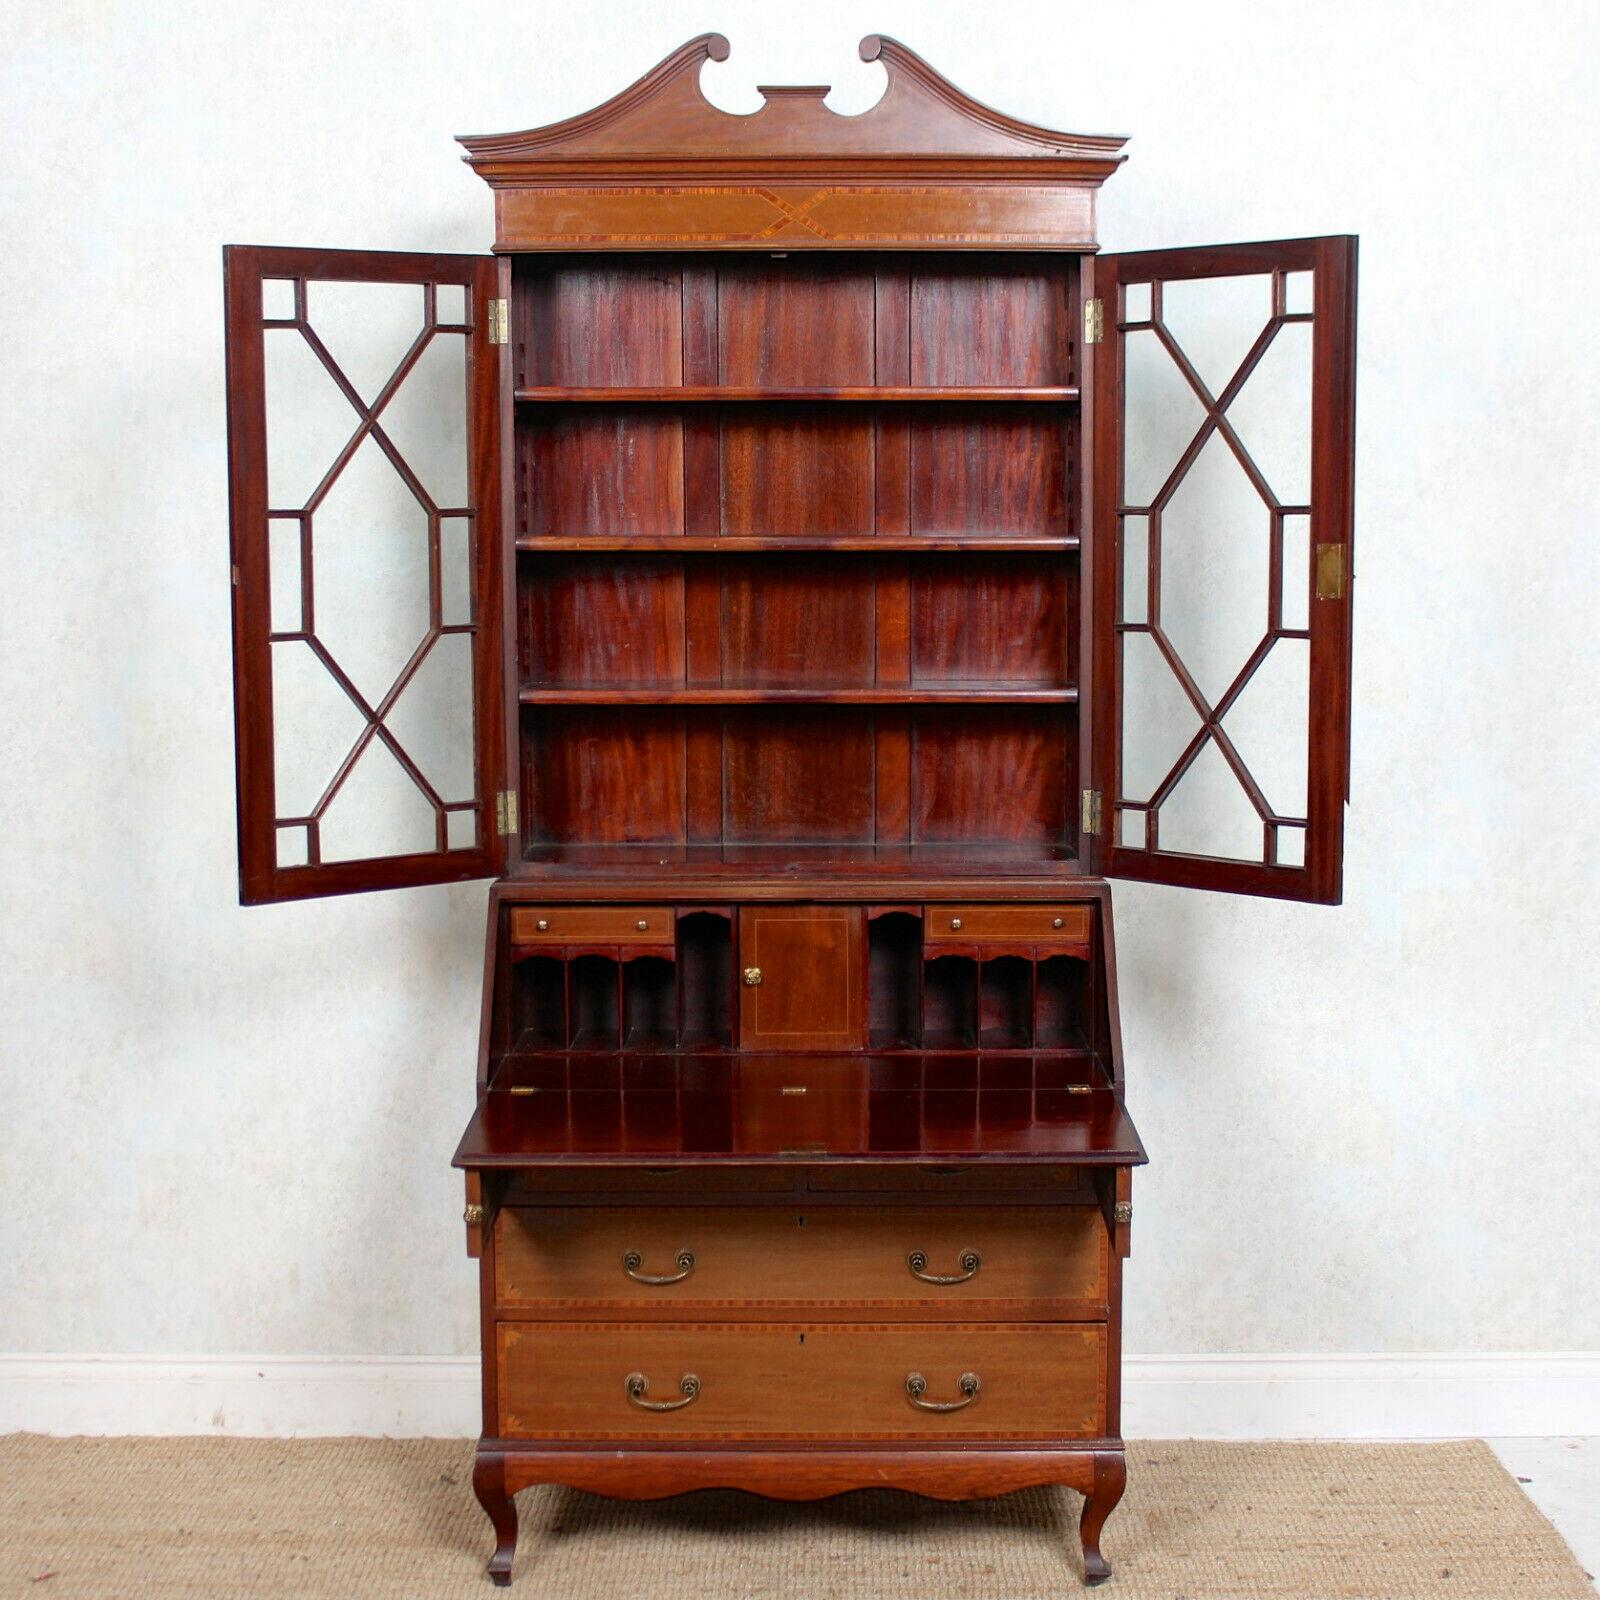 English Secretaire Bureau Bookcase Astragal Glazed Mahogany Library Cabinet In Good Condition For Sale In Newcastle upon Tyne, GB